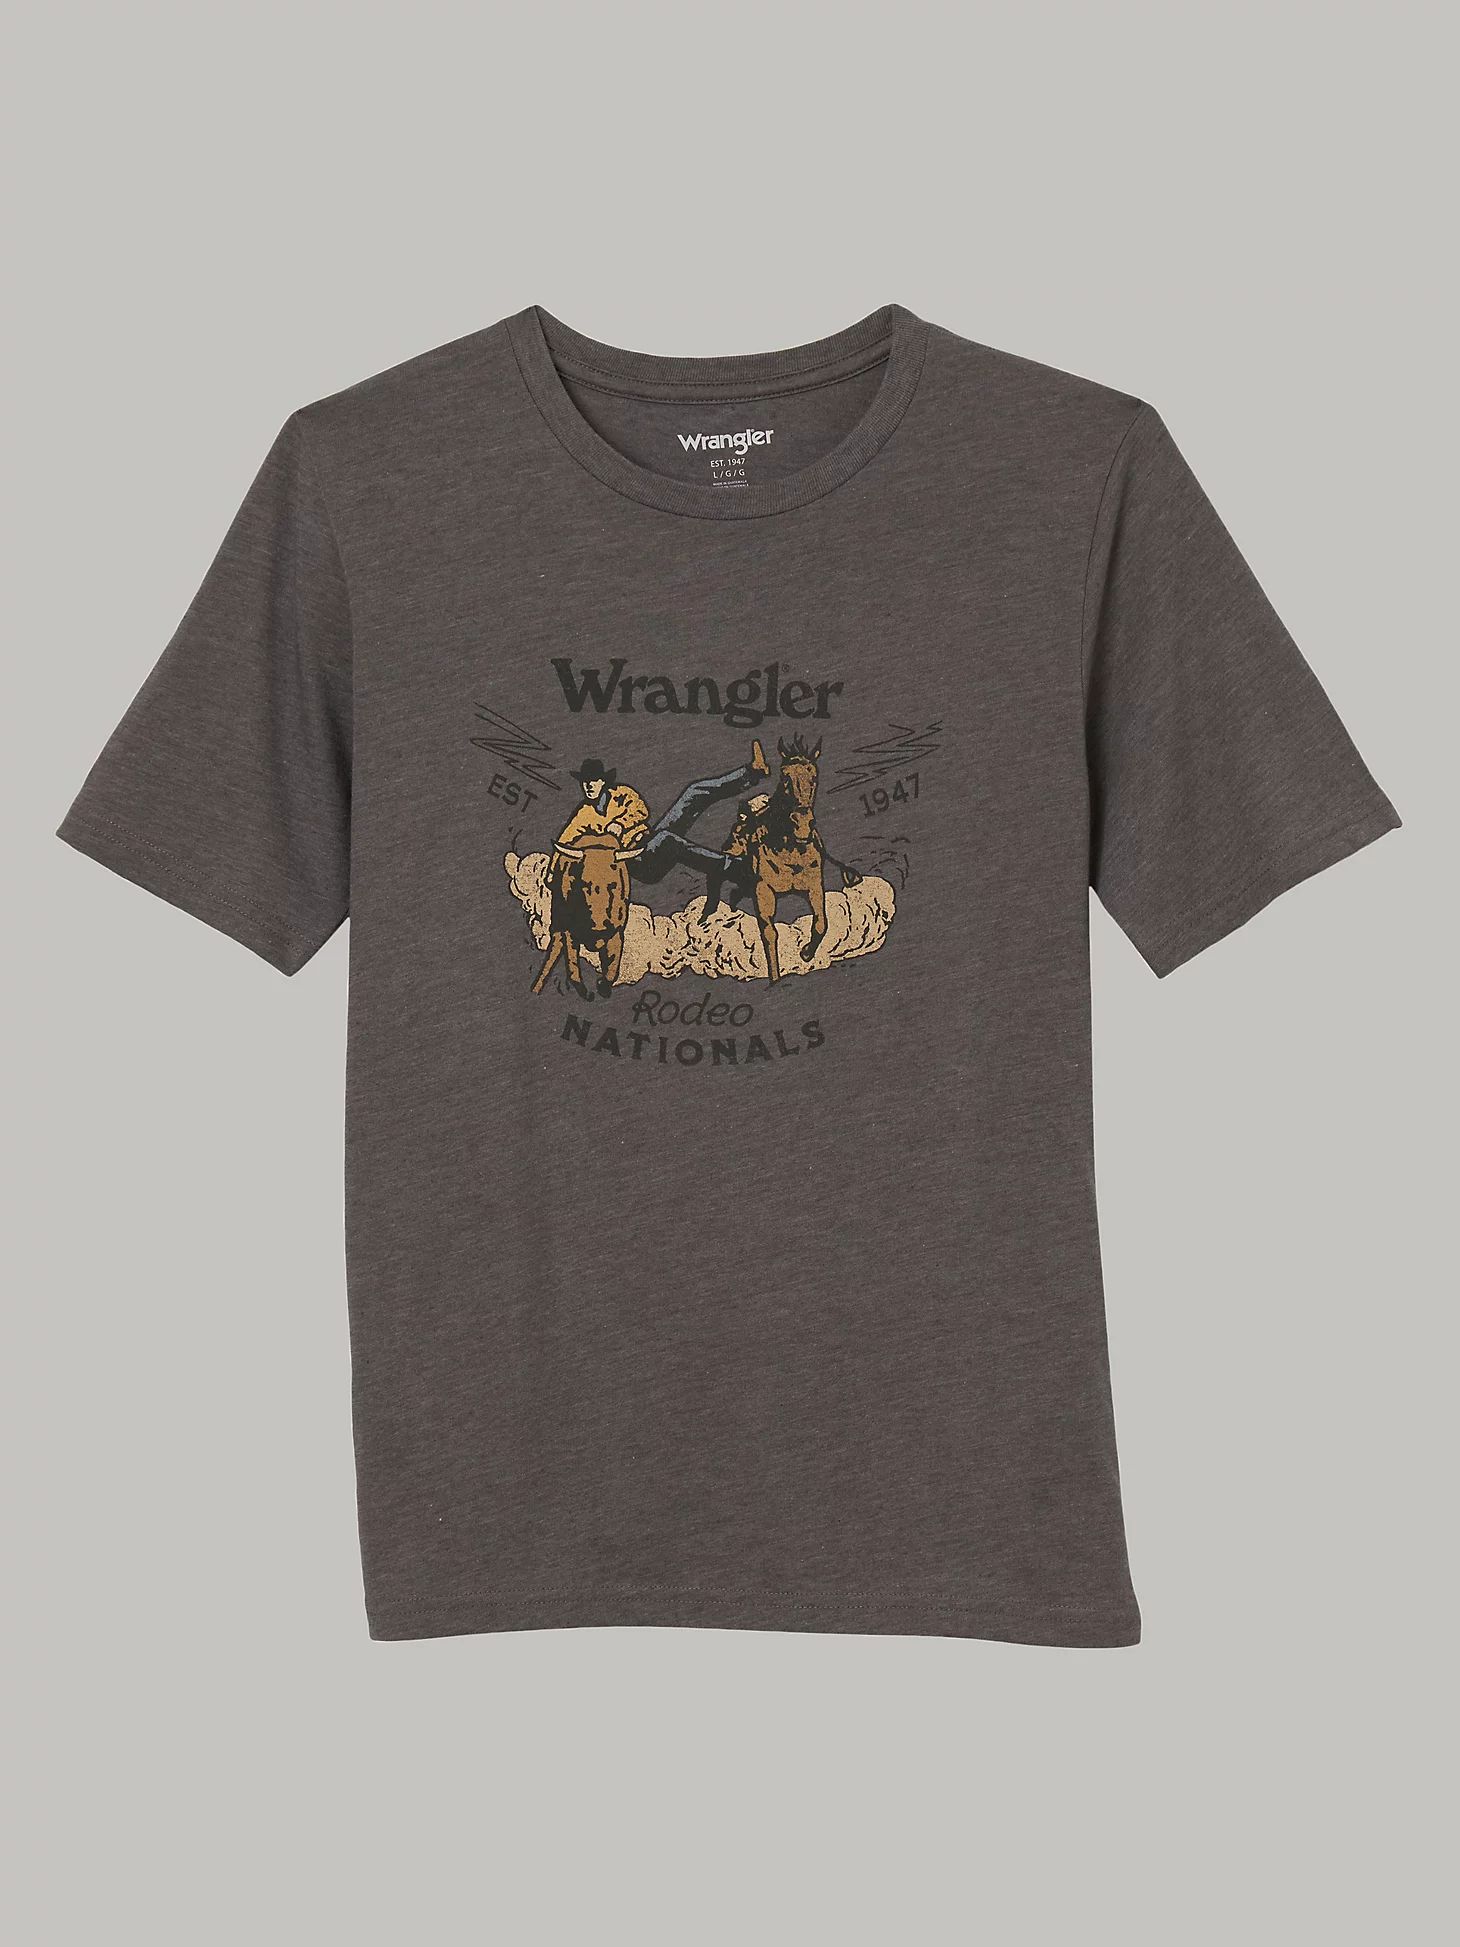 Boy's Wrangler Rodeo Nationals Graphic T-Shirt in Pewter | Wrangler